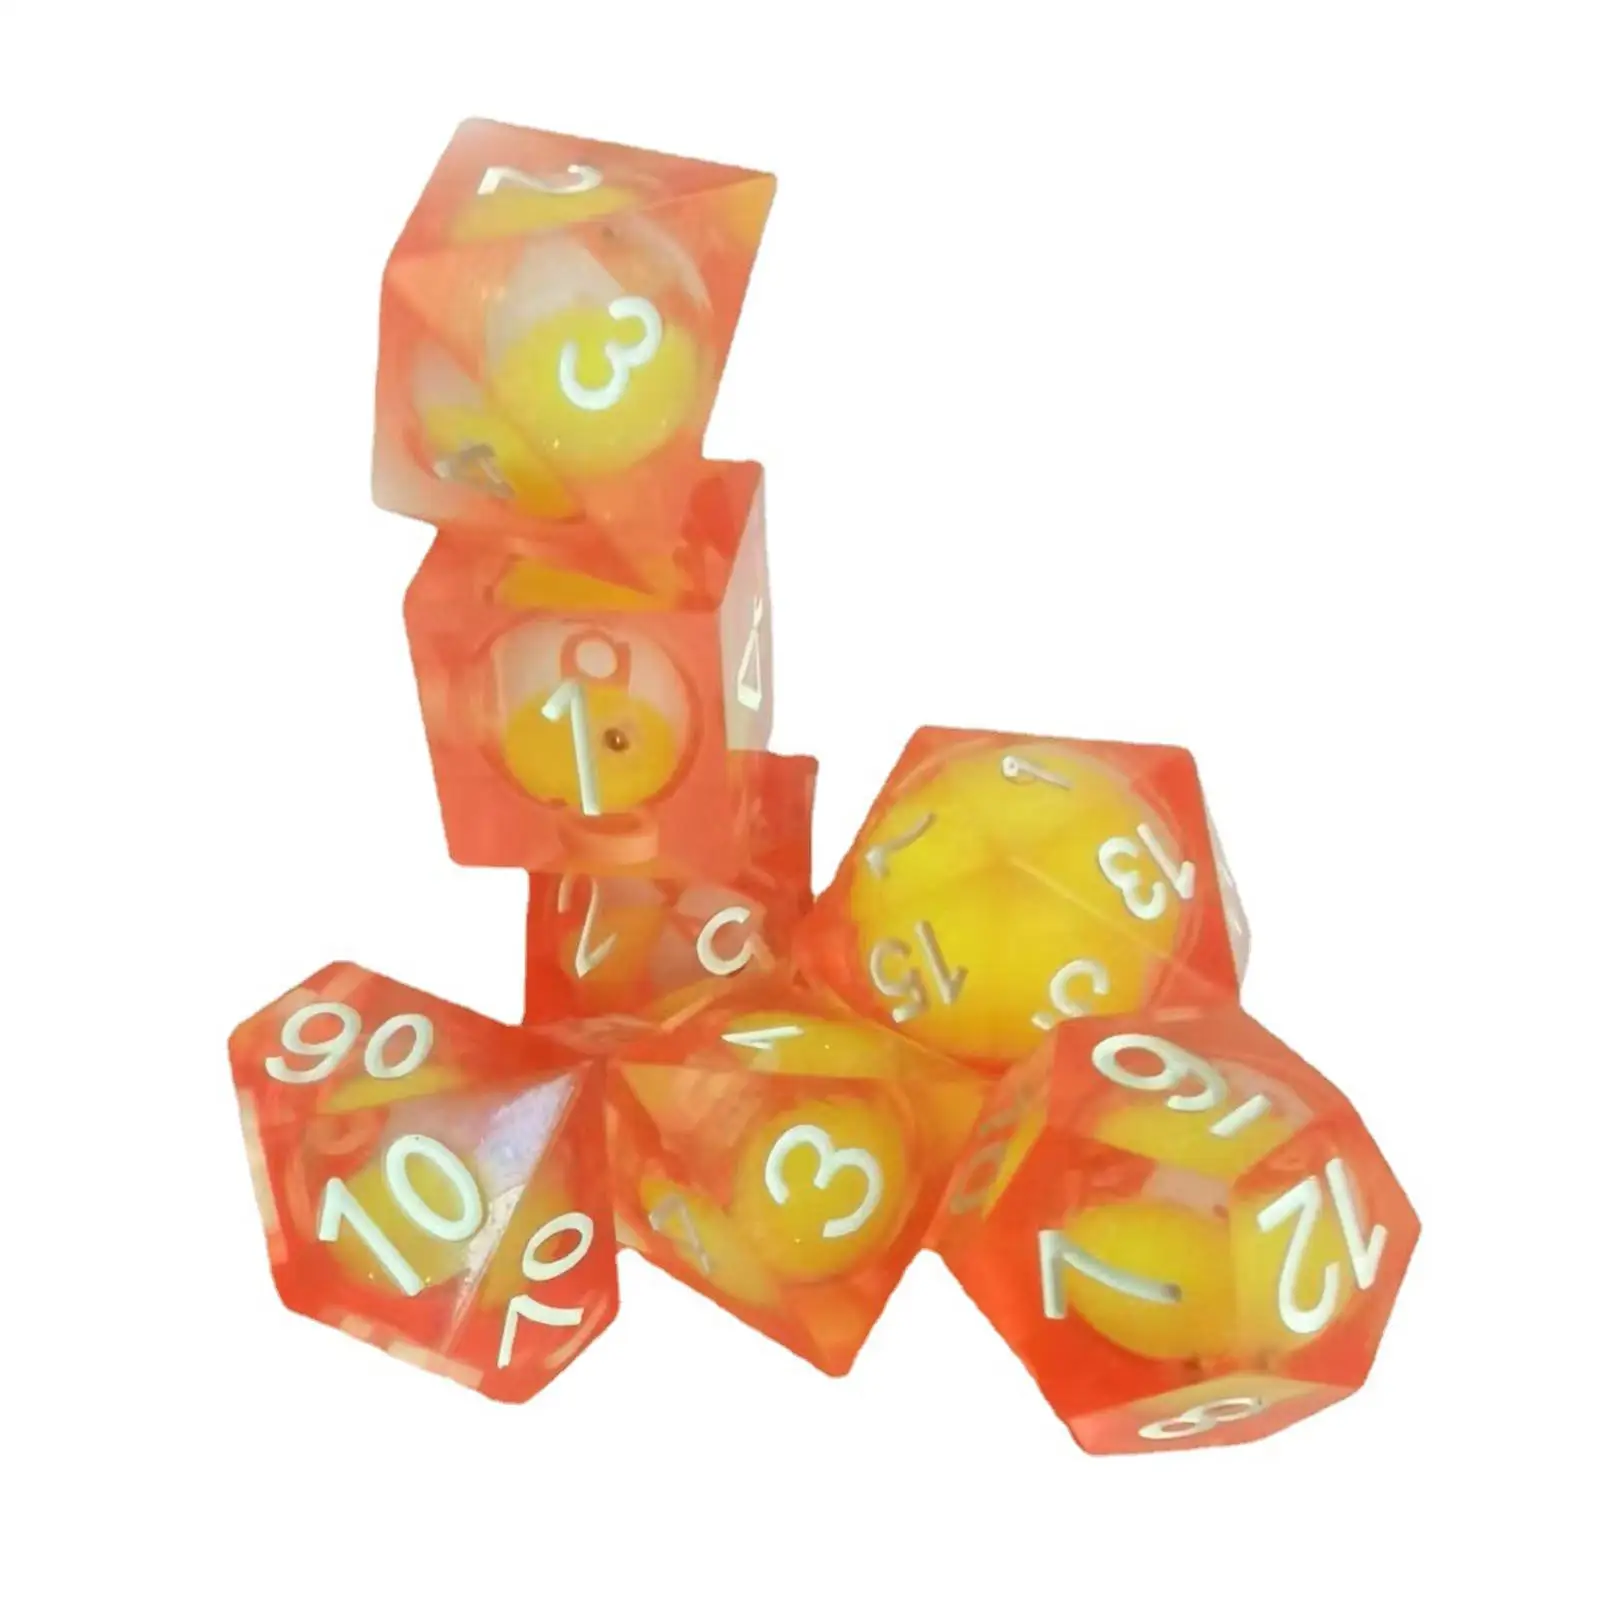 7x dices Set, Multi Sided Game Dices, Polyhedral Dice Set D20 D12 D10 D8 D6 D4 for KTV Card, Game